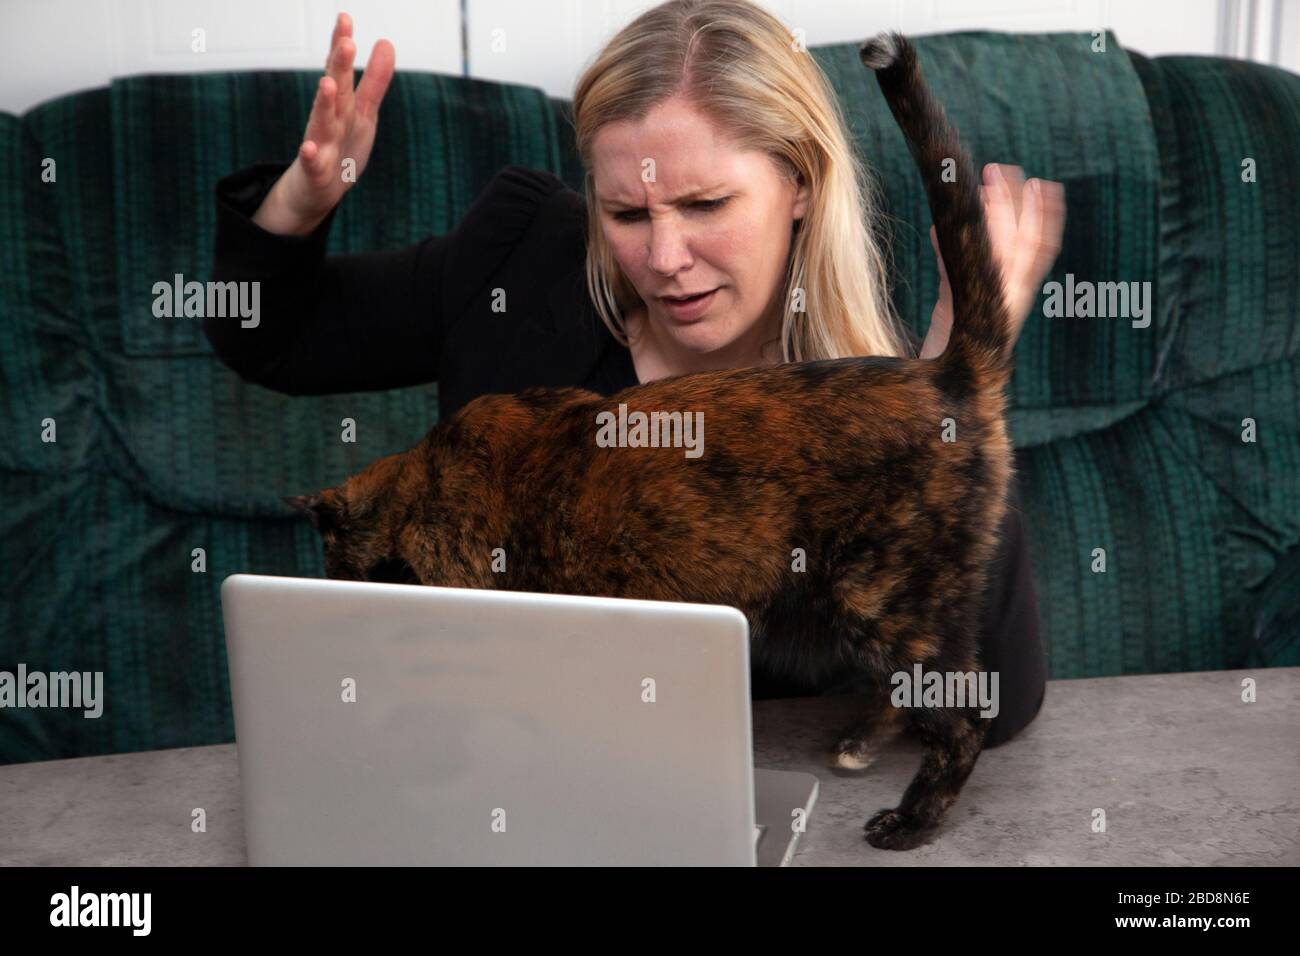 a cat on the laptop disturbs someone working from home Stock Photo